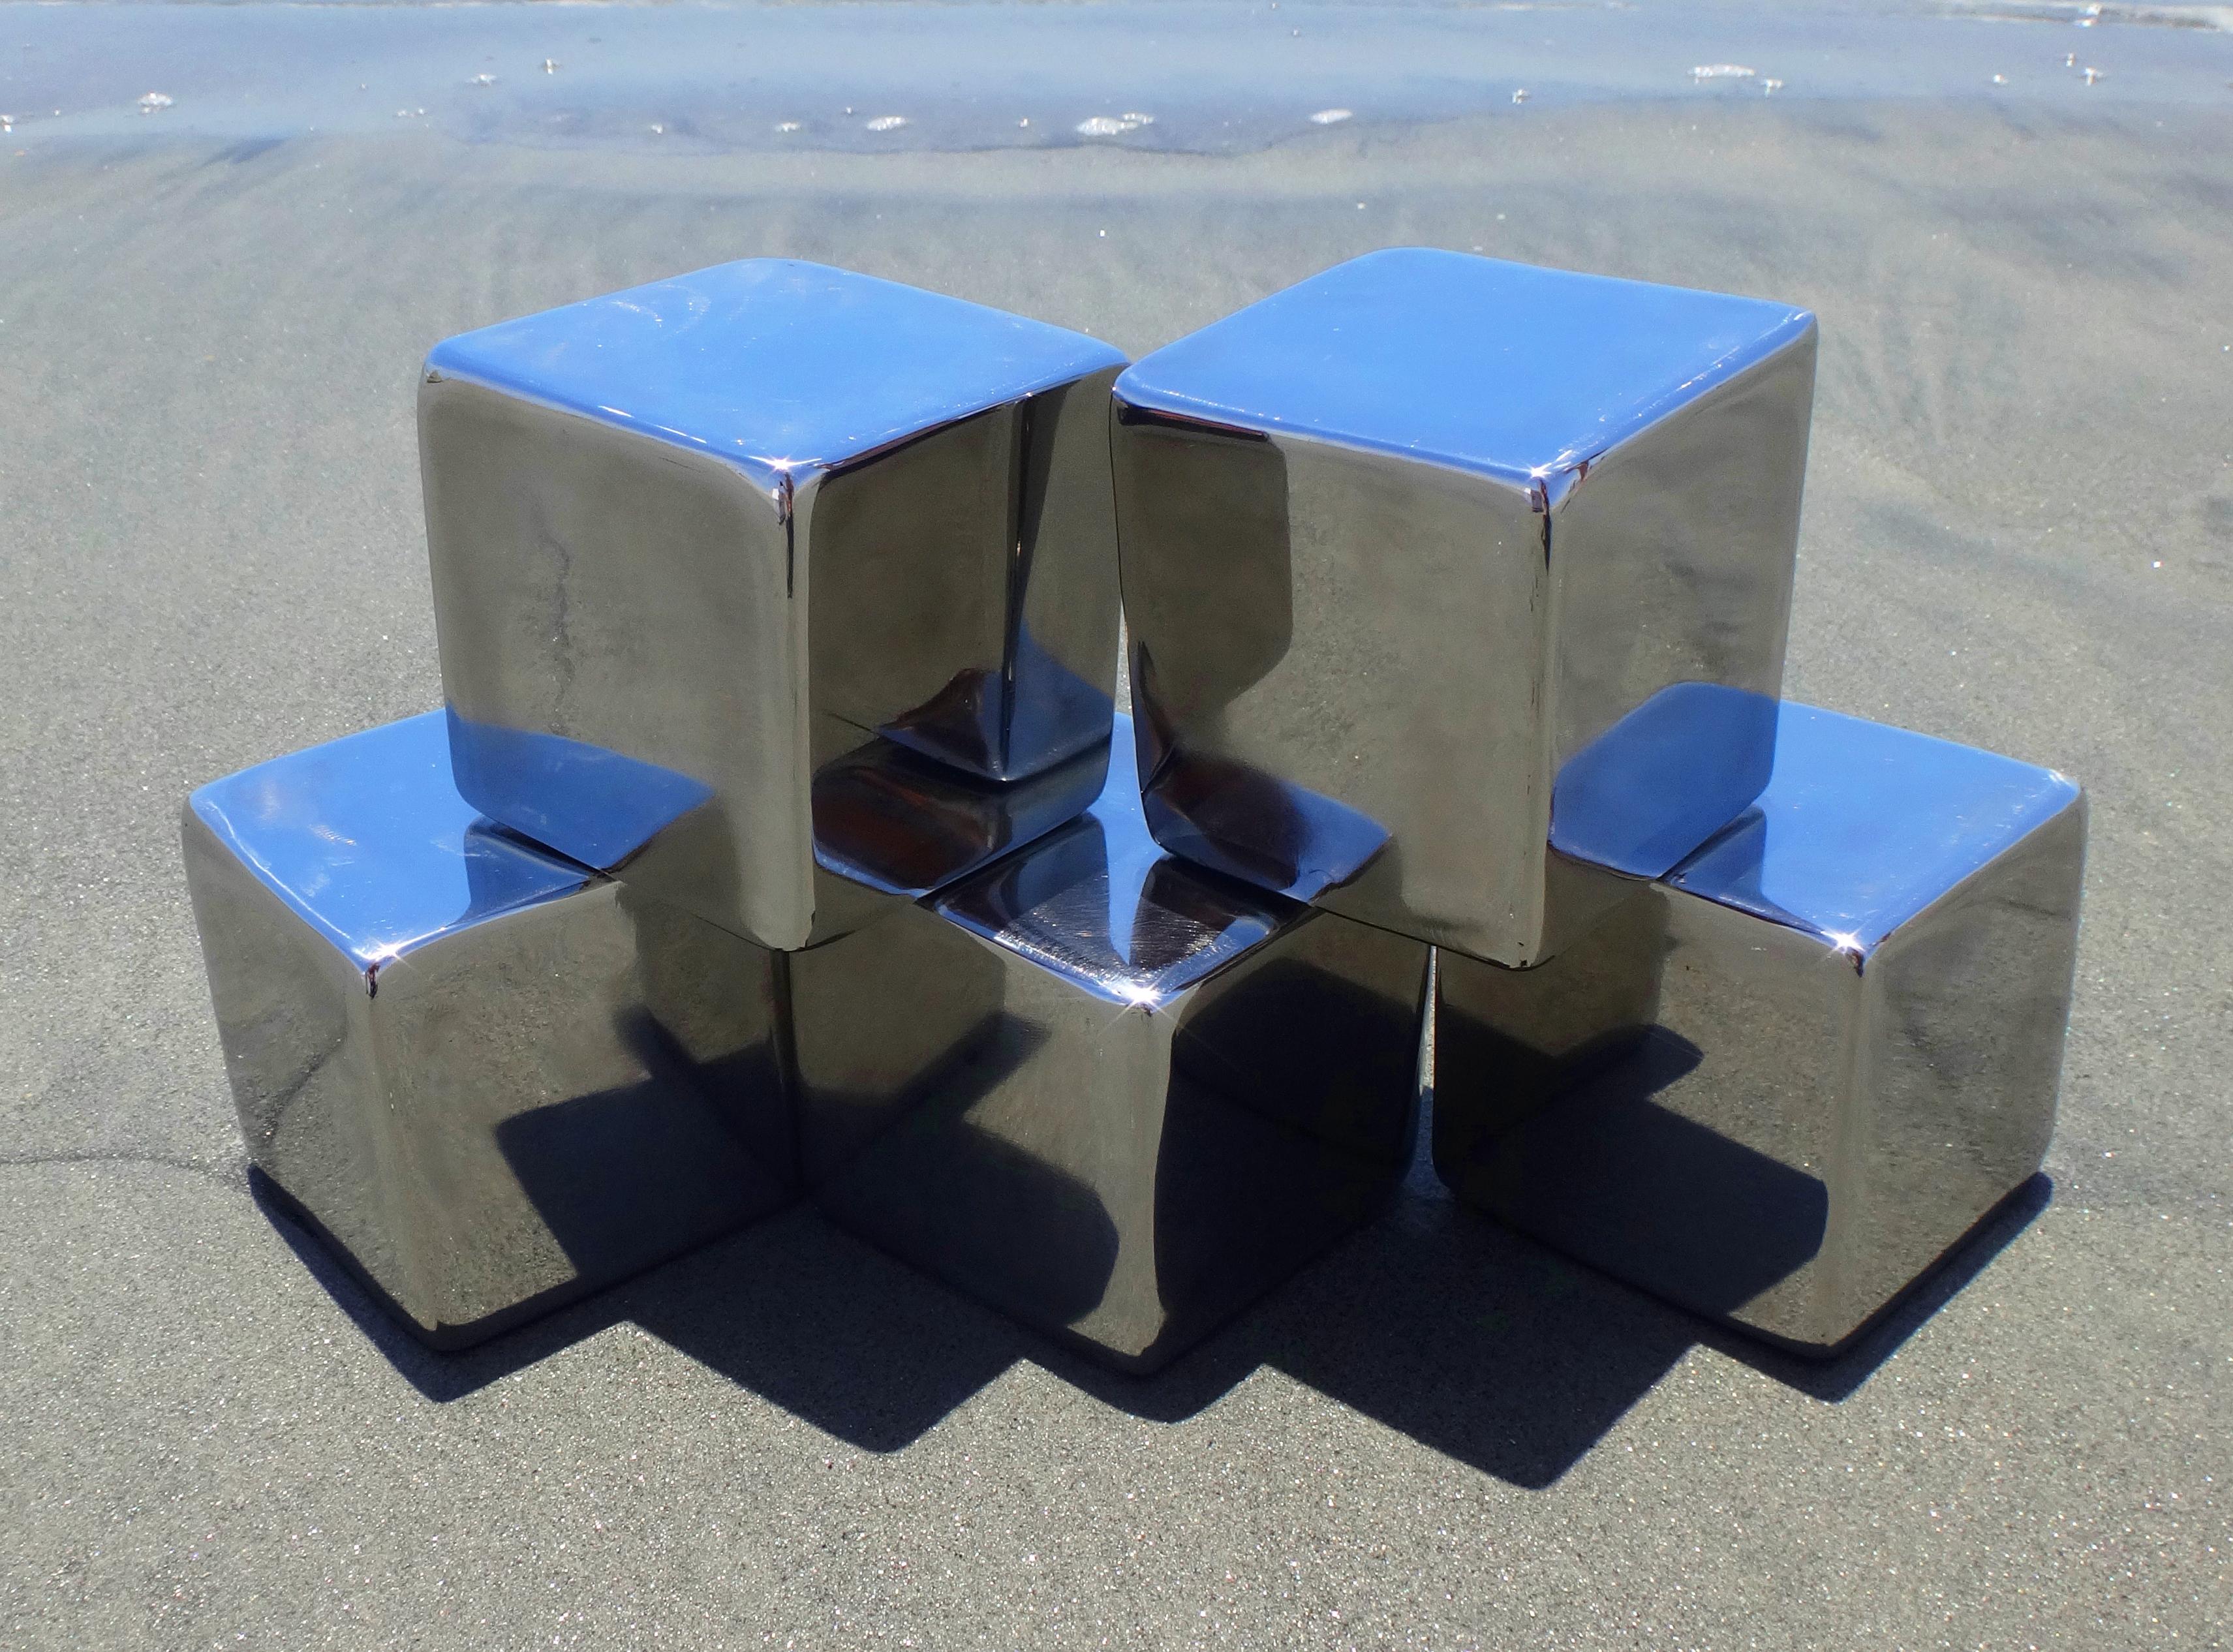 Formless is a project that attempts to replicate the logic of color, which is that color only exists because of and upon a background. Each cube is TIG welded from stainless steel and polished to a mirror finish. The cubes are then documented in